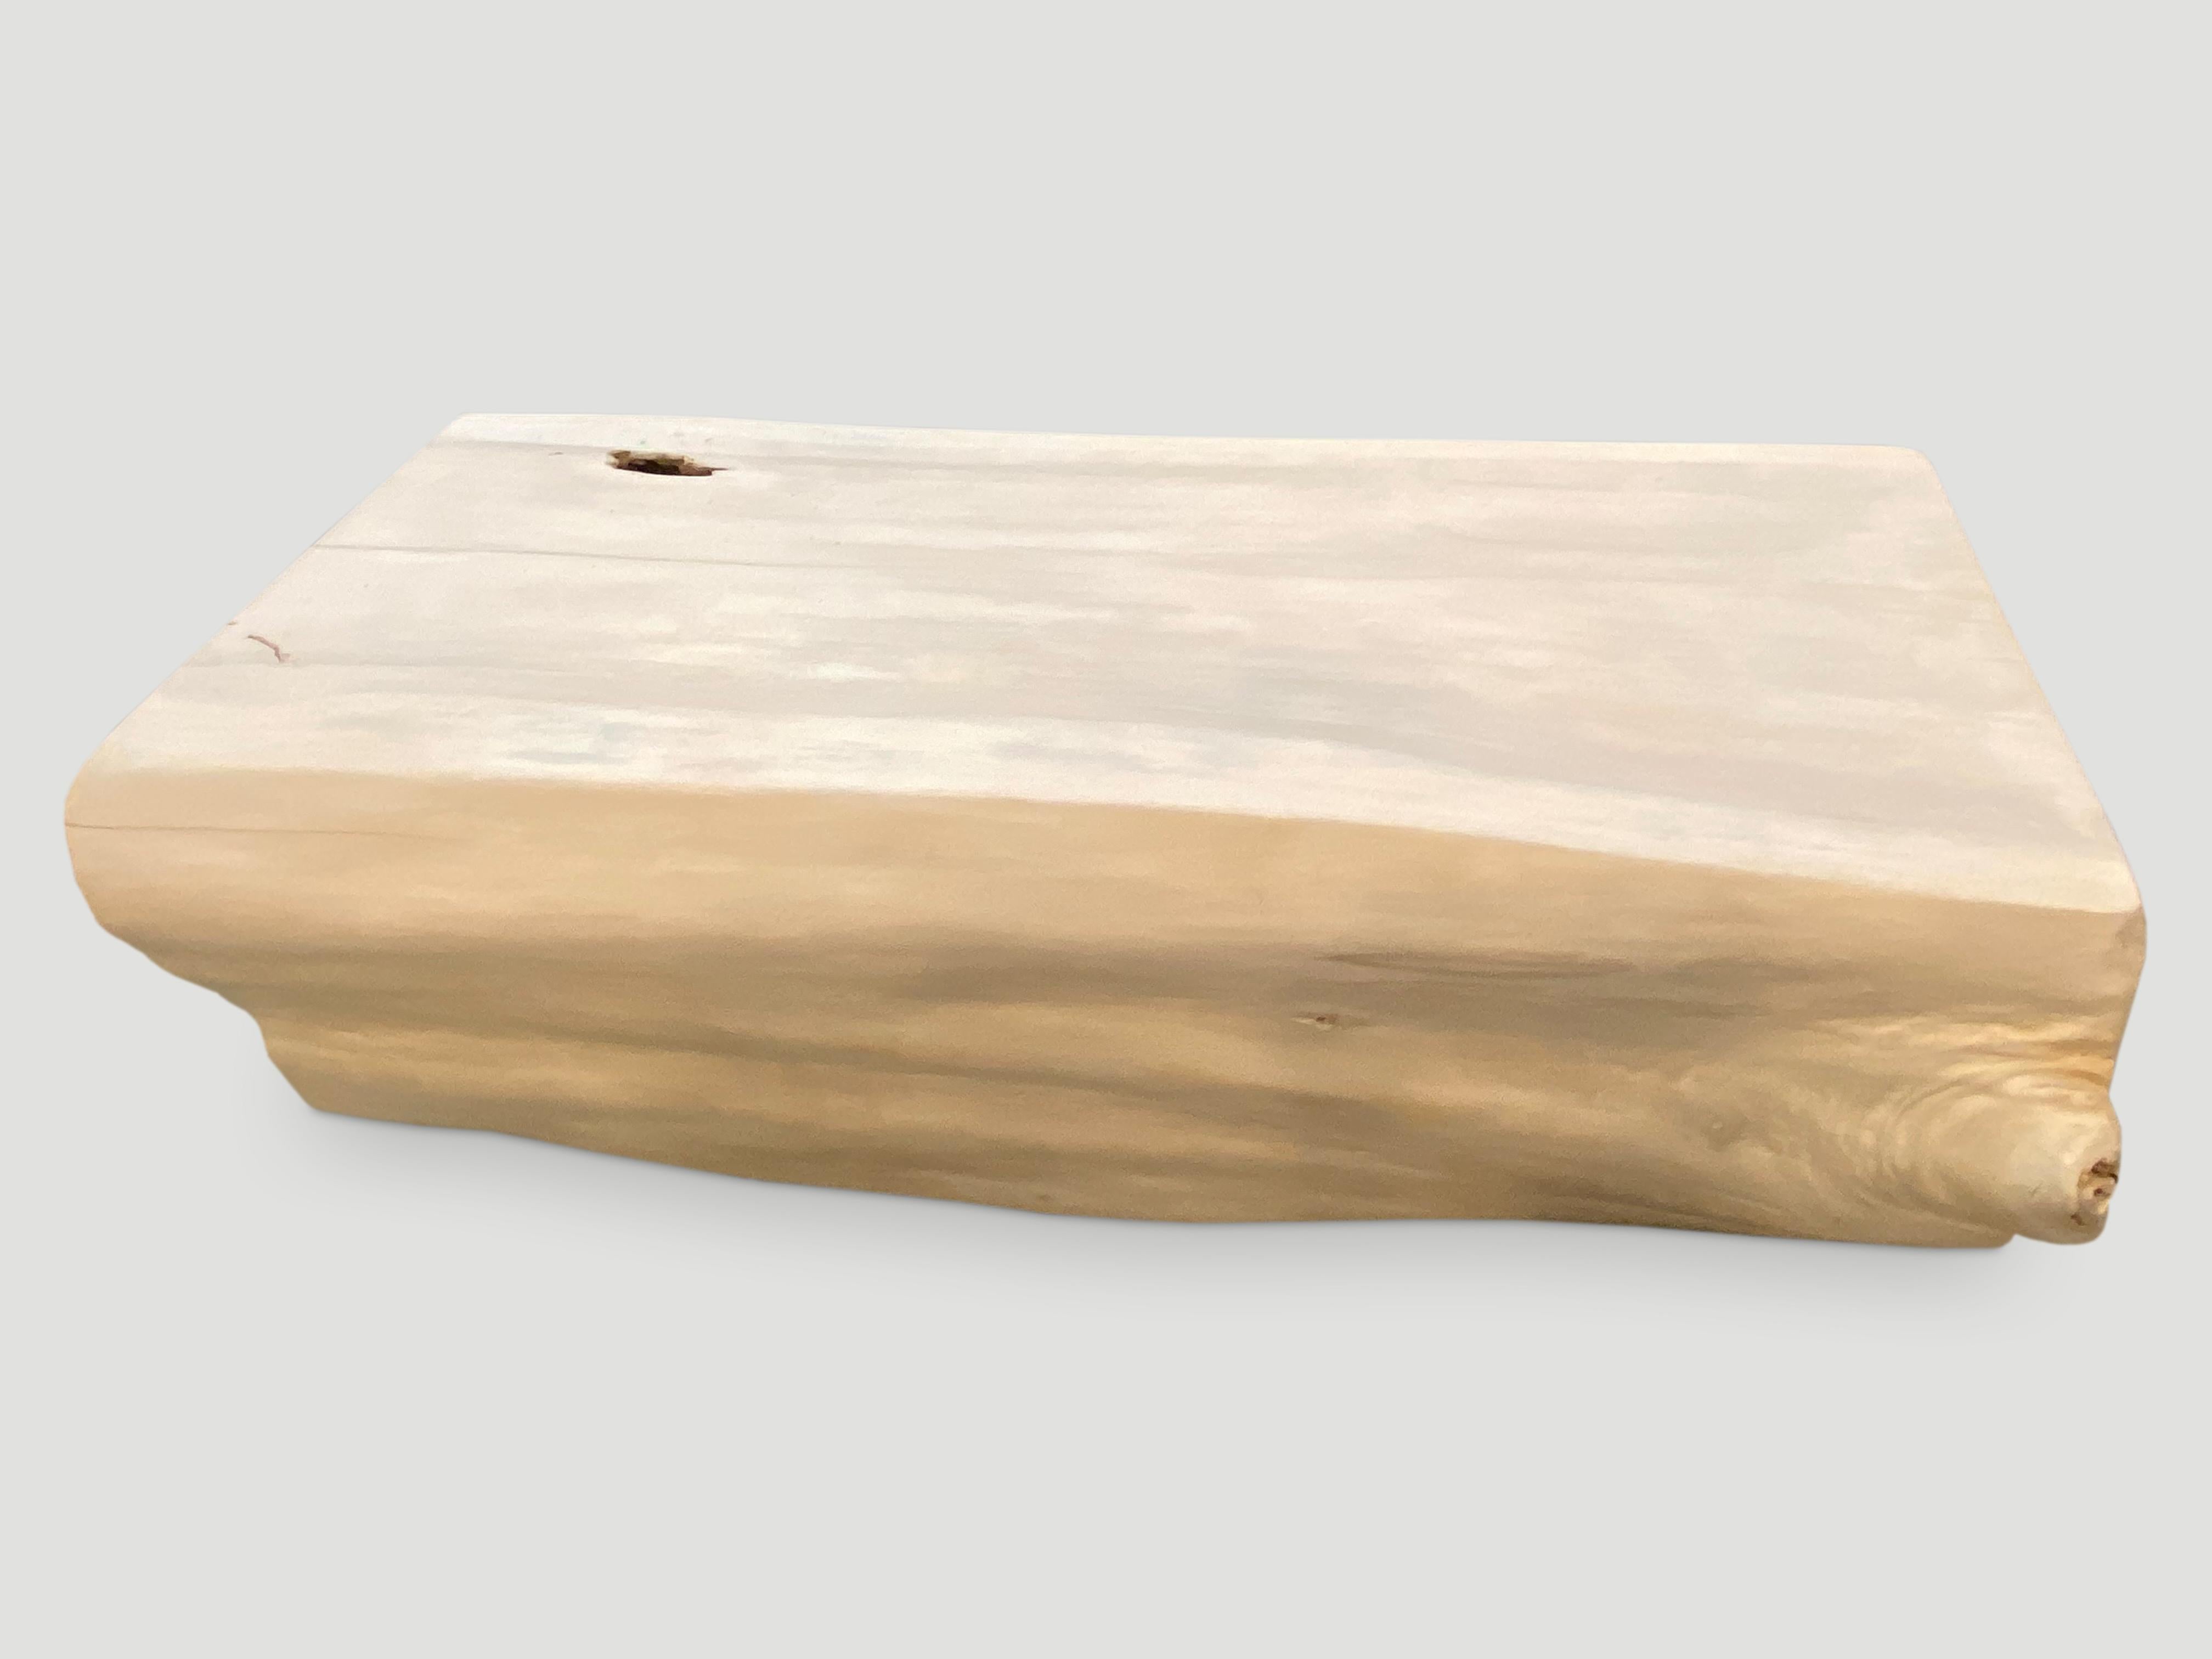 Beautiful organic reclaimed teak wood log bench. We sanded the top and sides and restored the inner section. Finally we bleached and added a light white wash. Organic is the new modern.

The St. Barts Collection features an exciting new line of